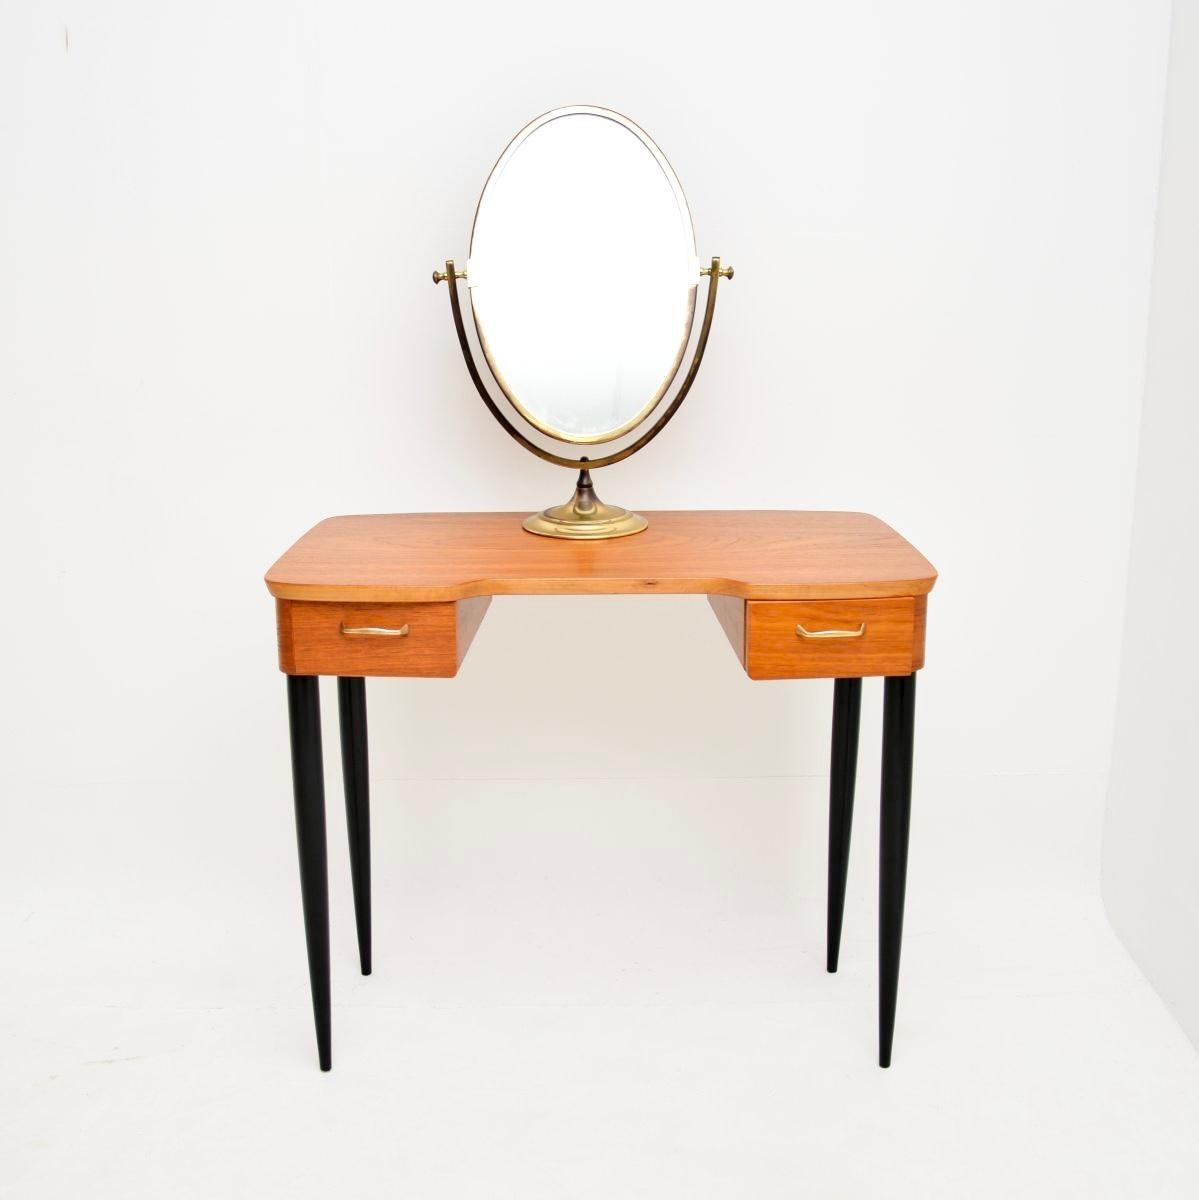 A very stylish and useful vintage Swedish teak desk / dressing table. We have recently imported this from Sweden, it dates from the 1960’s.

The quality is superb, this is beautifully designed and is a perfect size to be used as a small desk or as a